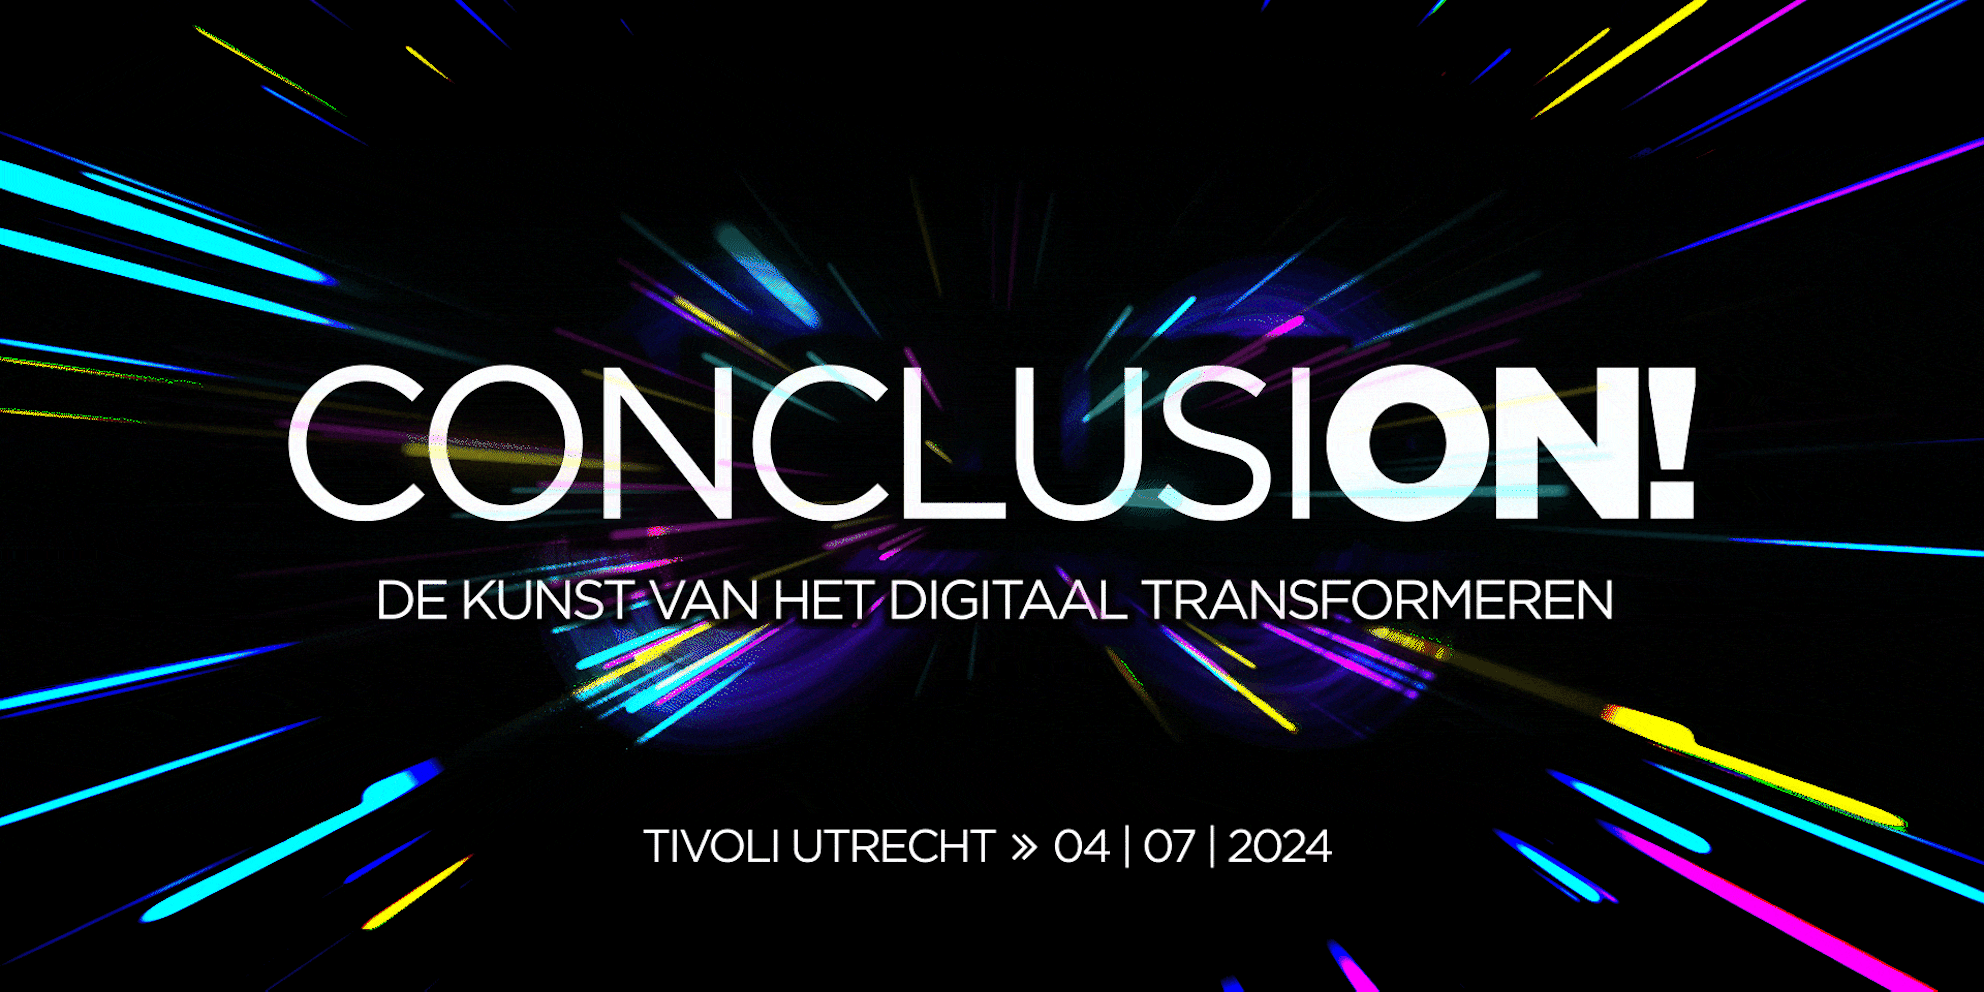 ConclusiON! – inspiration event on digital transformation at TivoliVredenburg on the 4th of July